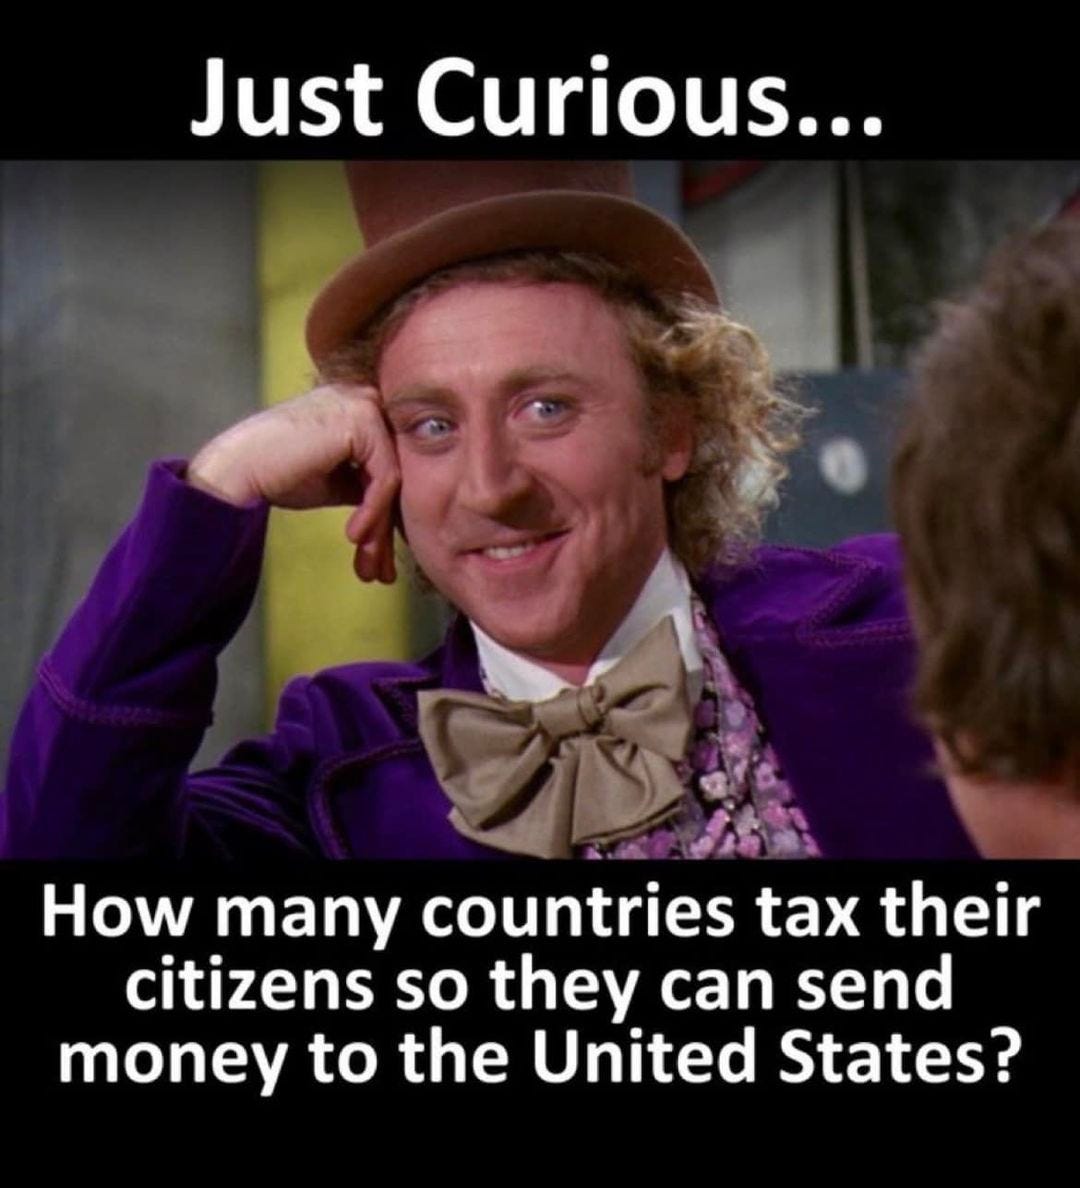 May be an image of 1 person and text that says 'Just Curious... AAAa How many countries tax their citizens so they can send money to the United States?'